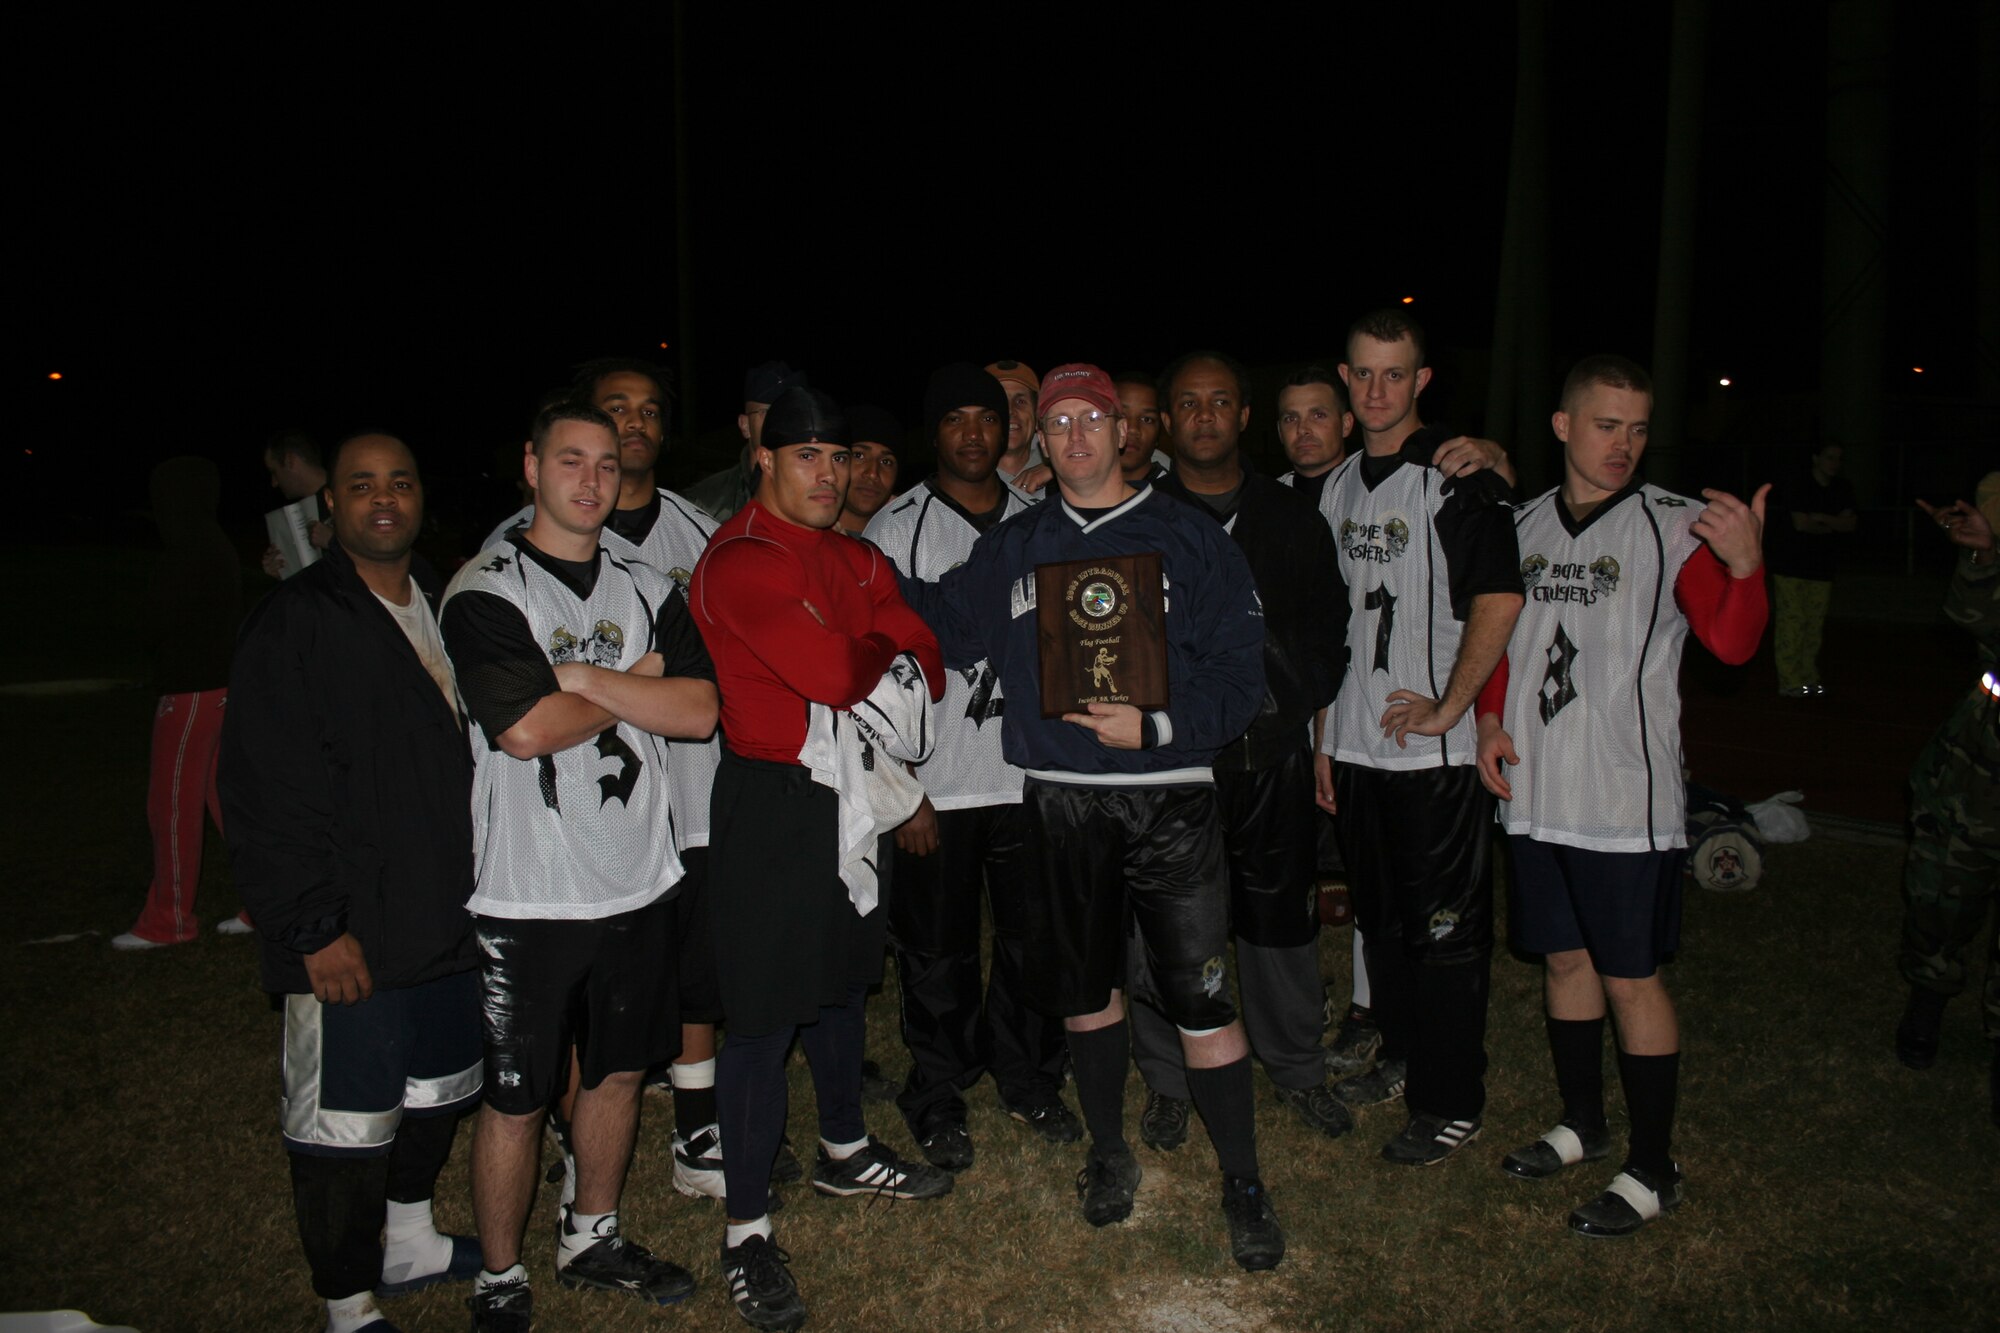 The members 39th Contracting Squadron/Civil Engineer Squadron intramural flag football team pose for a pic after losing to the 39th Logistic Readiness Squadron 18-12 in overtime. (U.S. Air Force photo by Staff Sgt. Oshawn Jefferson)